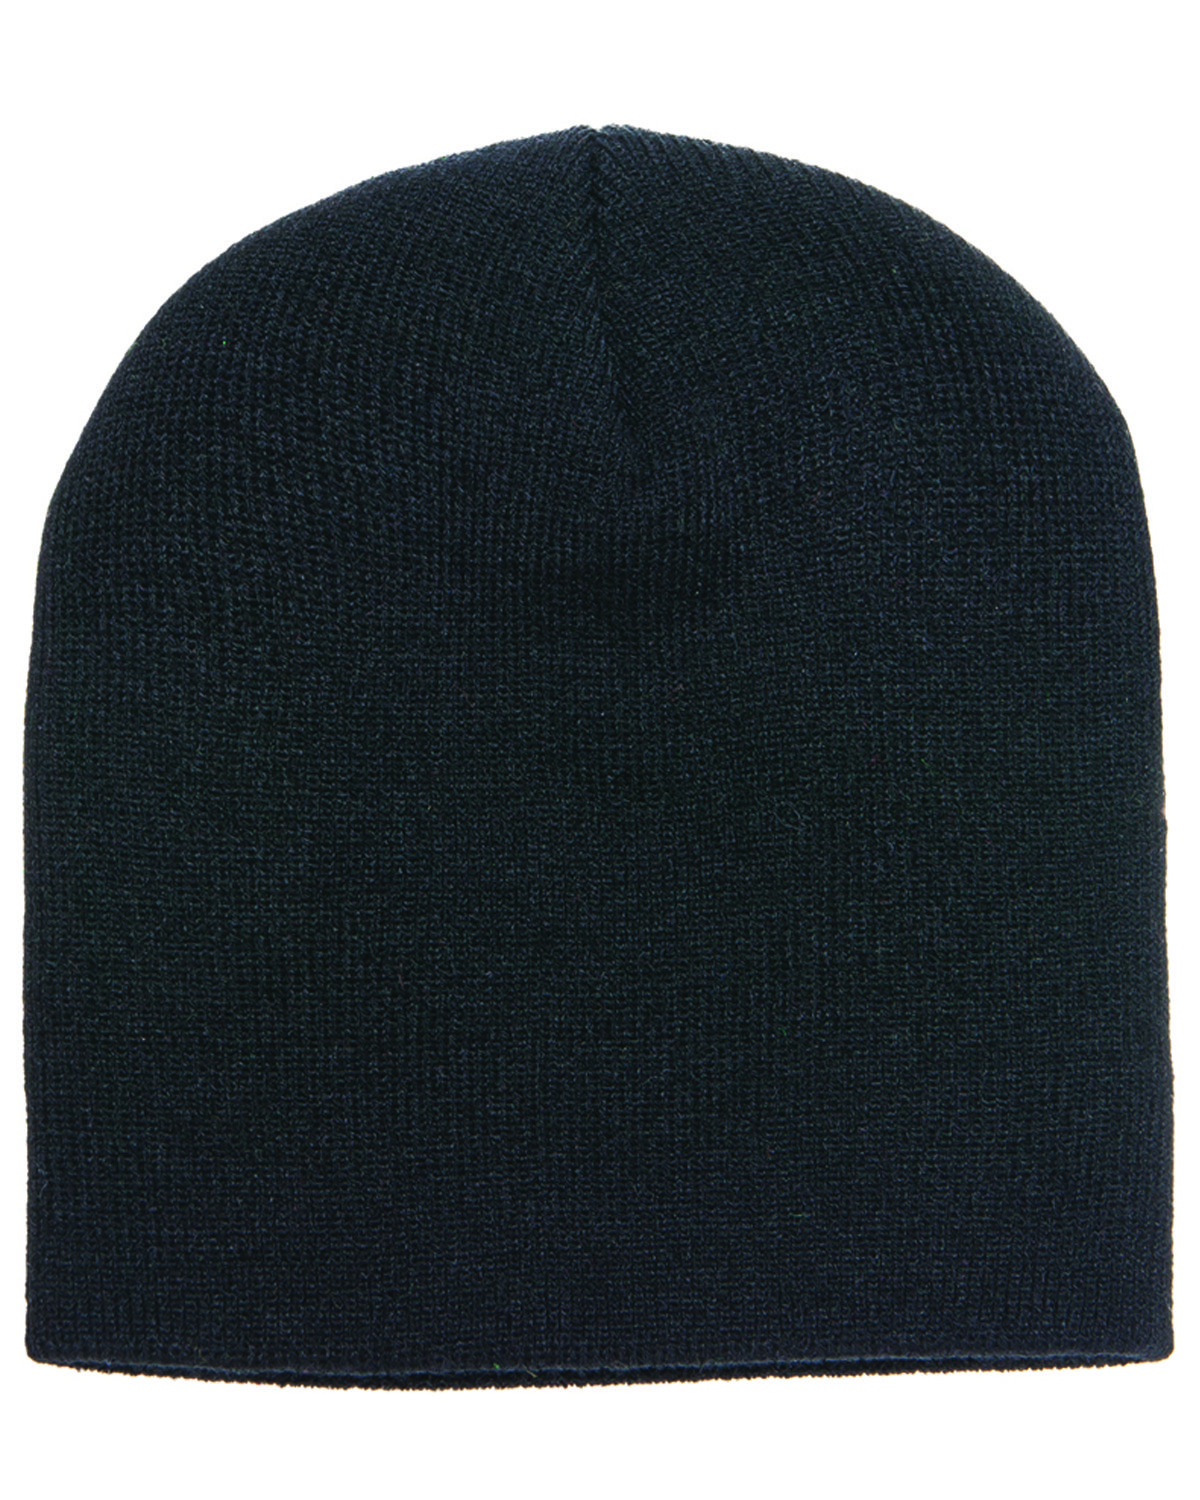 Yupoong Adult | alphabroder Beanie Knit